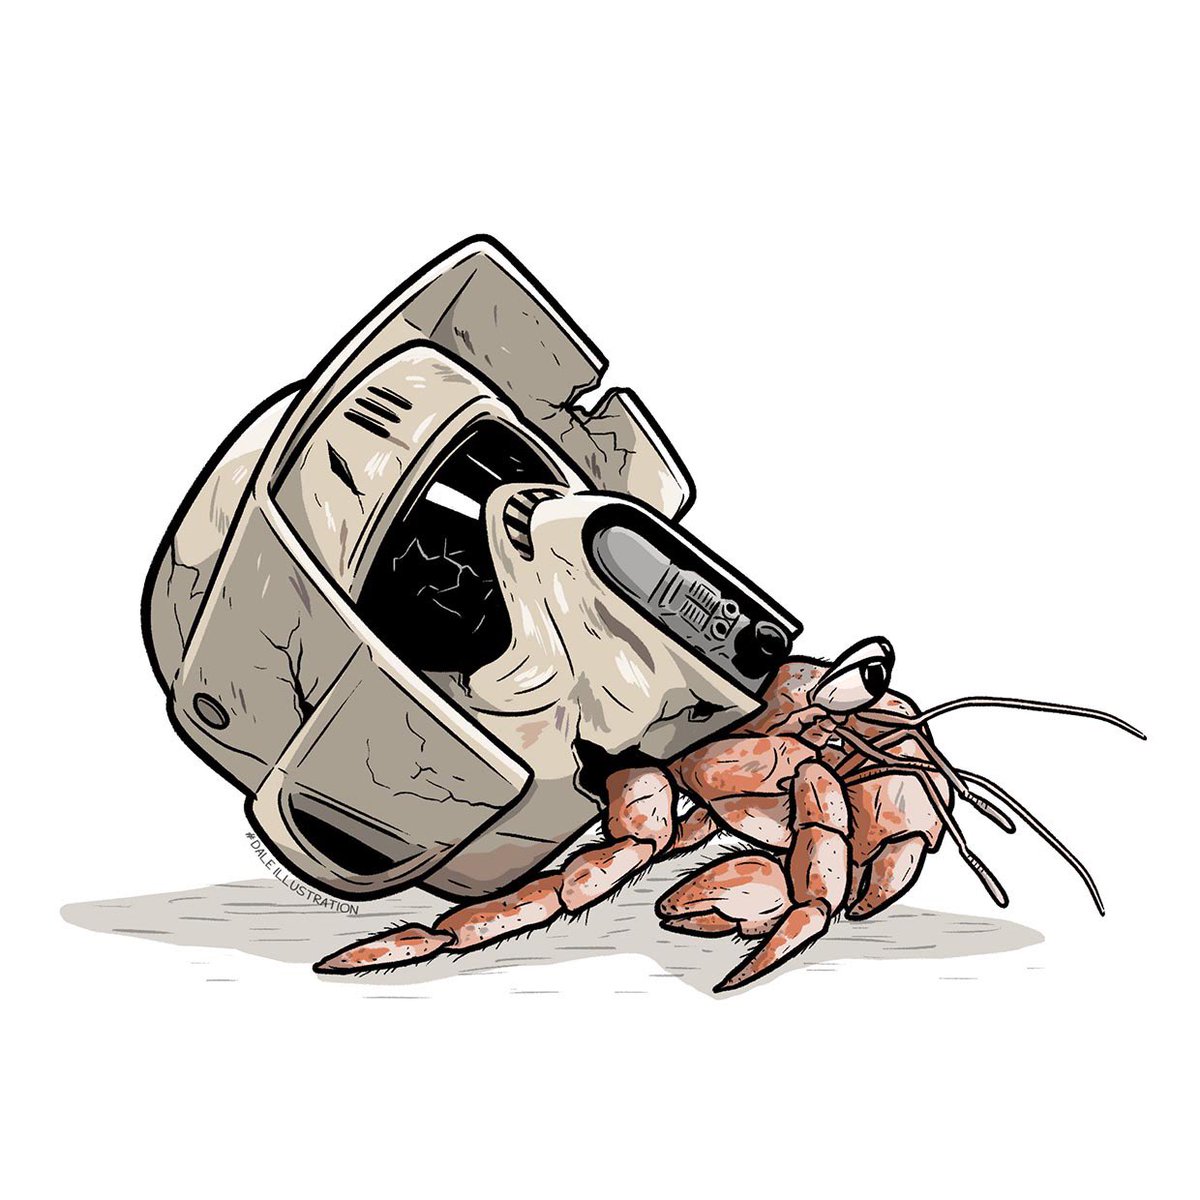 May the 4th be with you.. 

#StarWars #MayThe4thBeWithYou #scouttrooper #hermitcrab #illustration